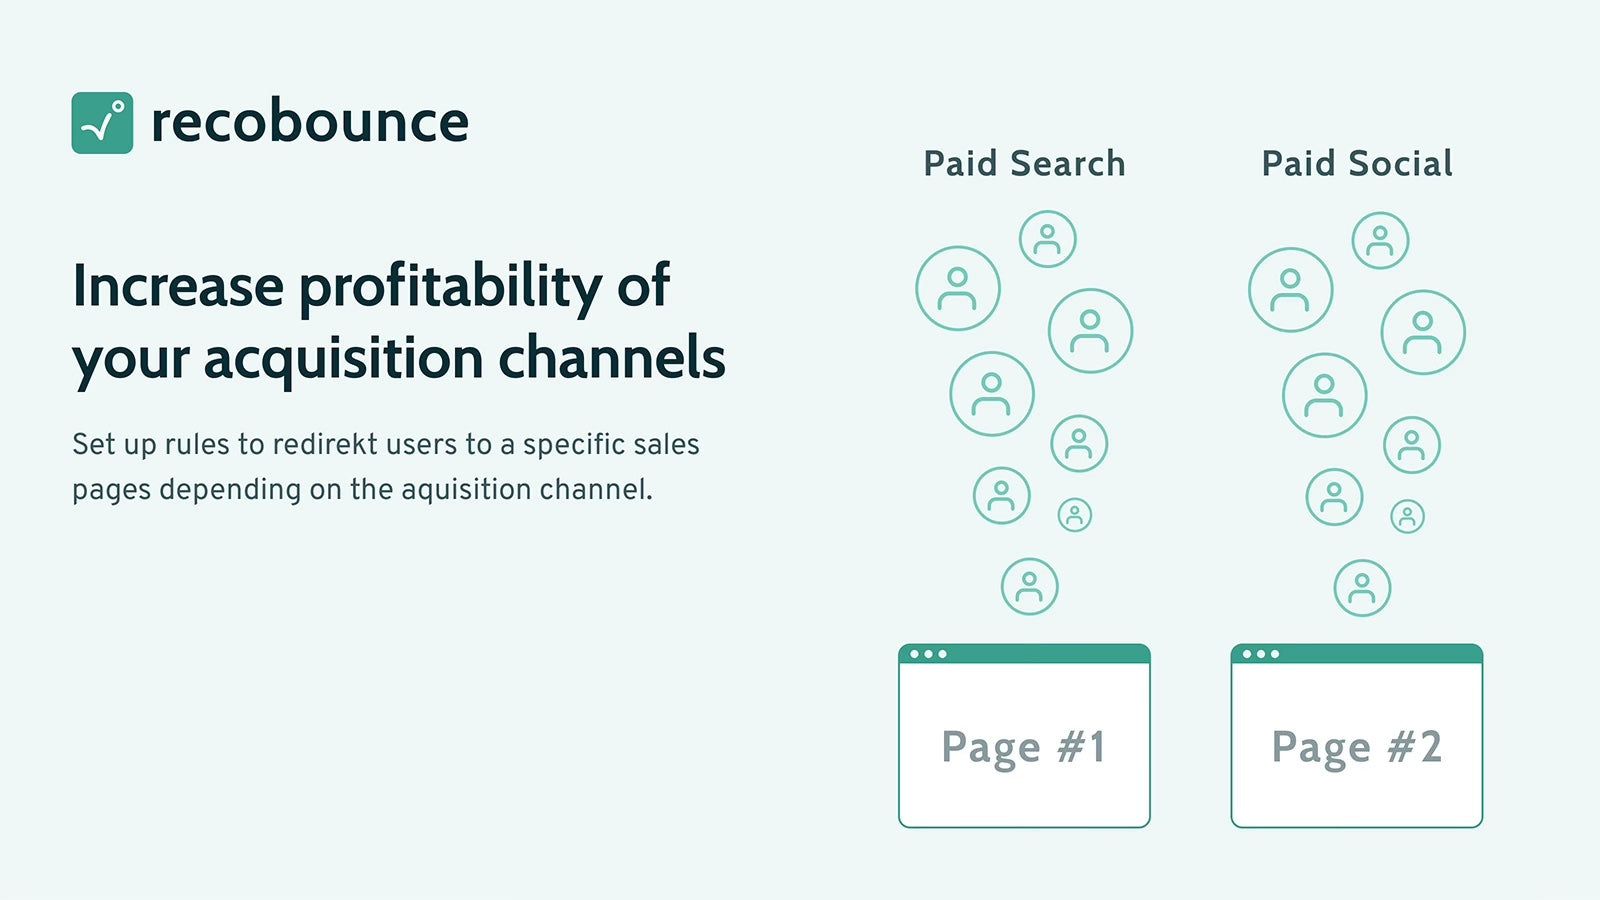 Increase profitability of your acquisition channels